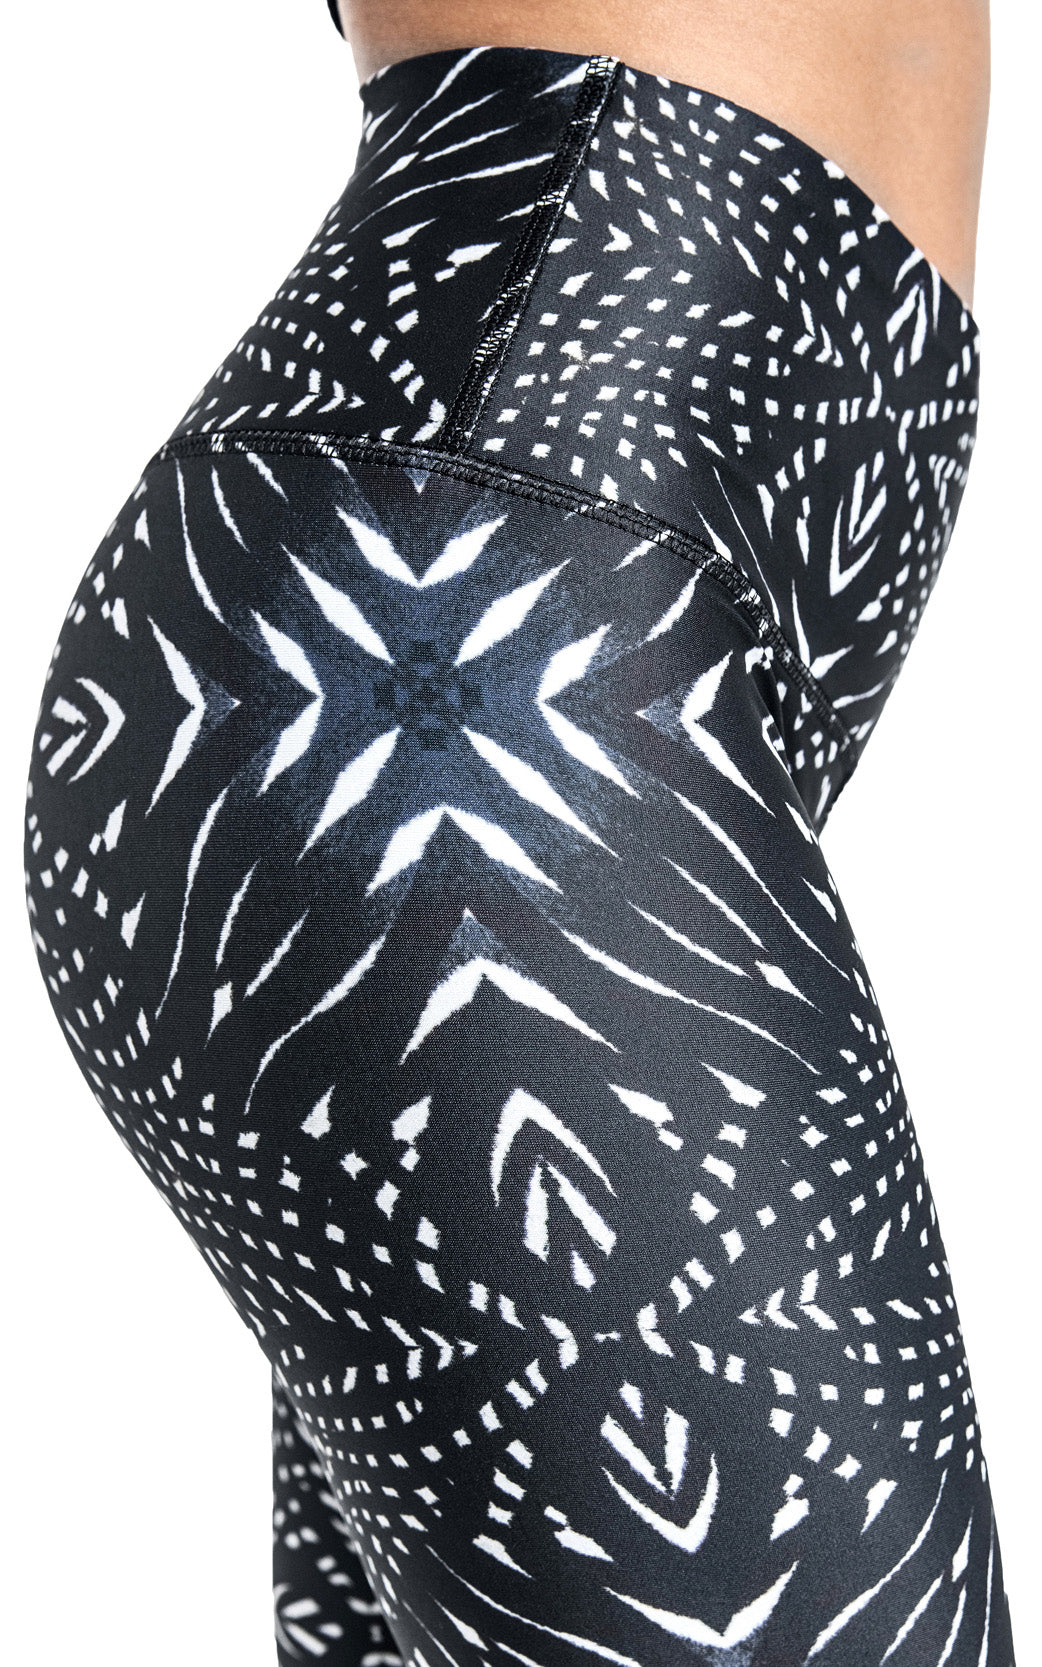 Women's High rise legging in digital black and white abstract aztec zebra skin print. Pocket free made from soft fabric 4 way stretch and 26" inseam